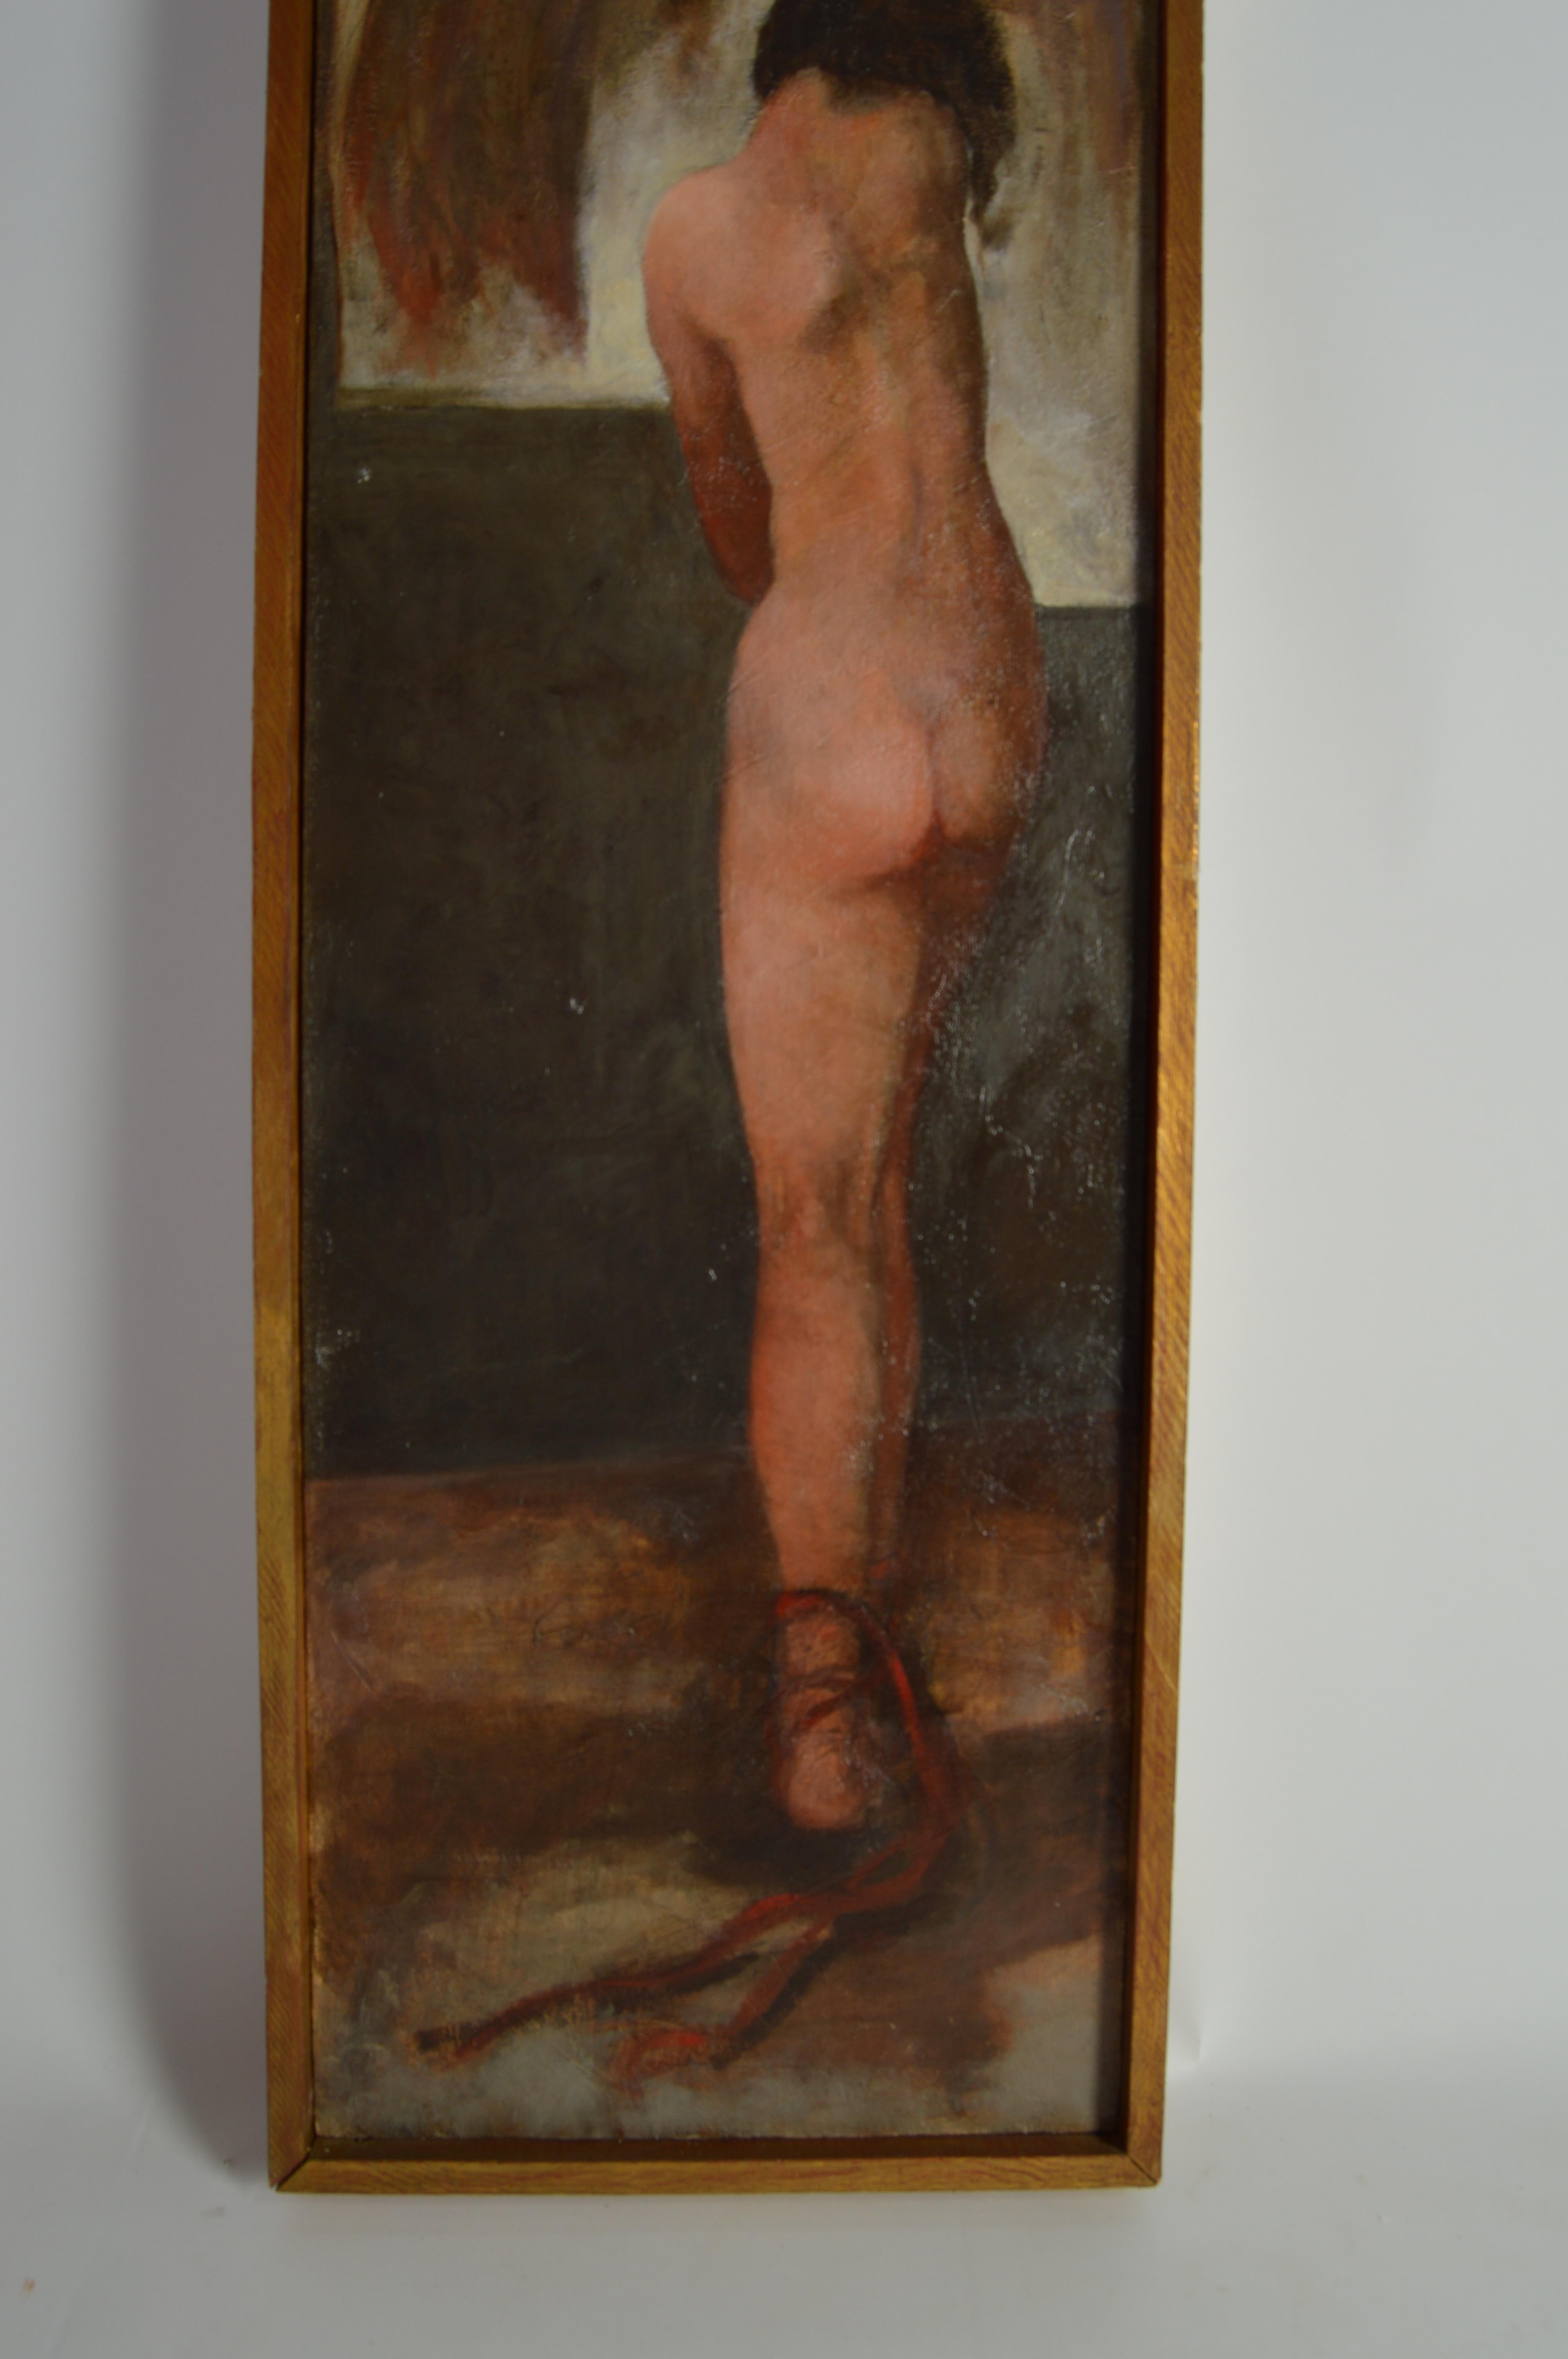 American Art Deco Nude Oil Painting on Burlap circa 1930 in the Manner of Edvard Munch